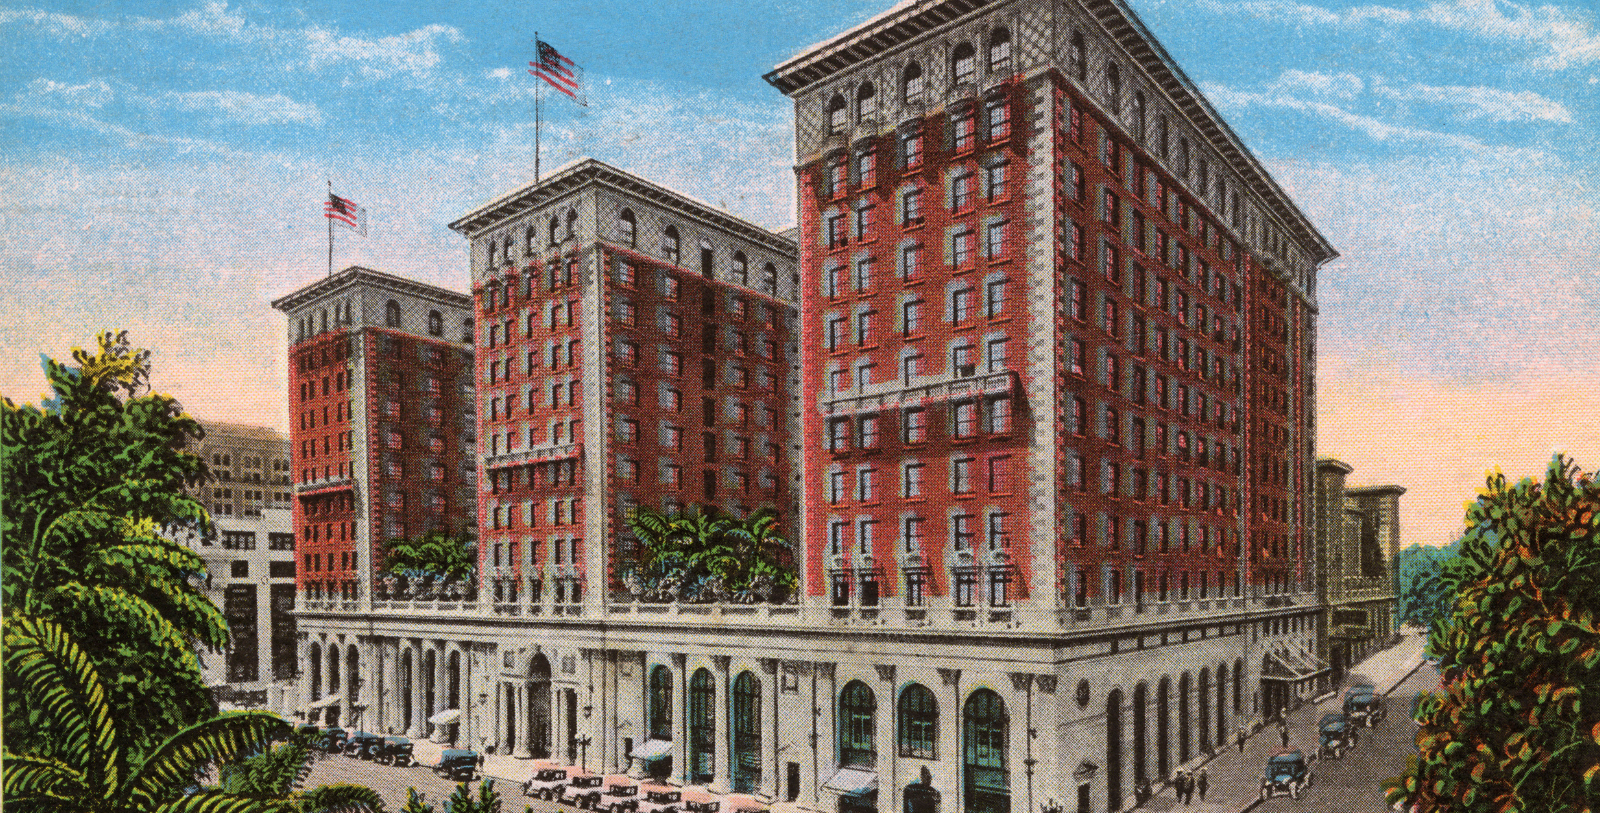 Historical image of JFK campaign headquarters sign hanging on The Biltmore Los Angeles, 1923, a Member of Historic Hotels of America since 2023 in Los Angeles, California